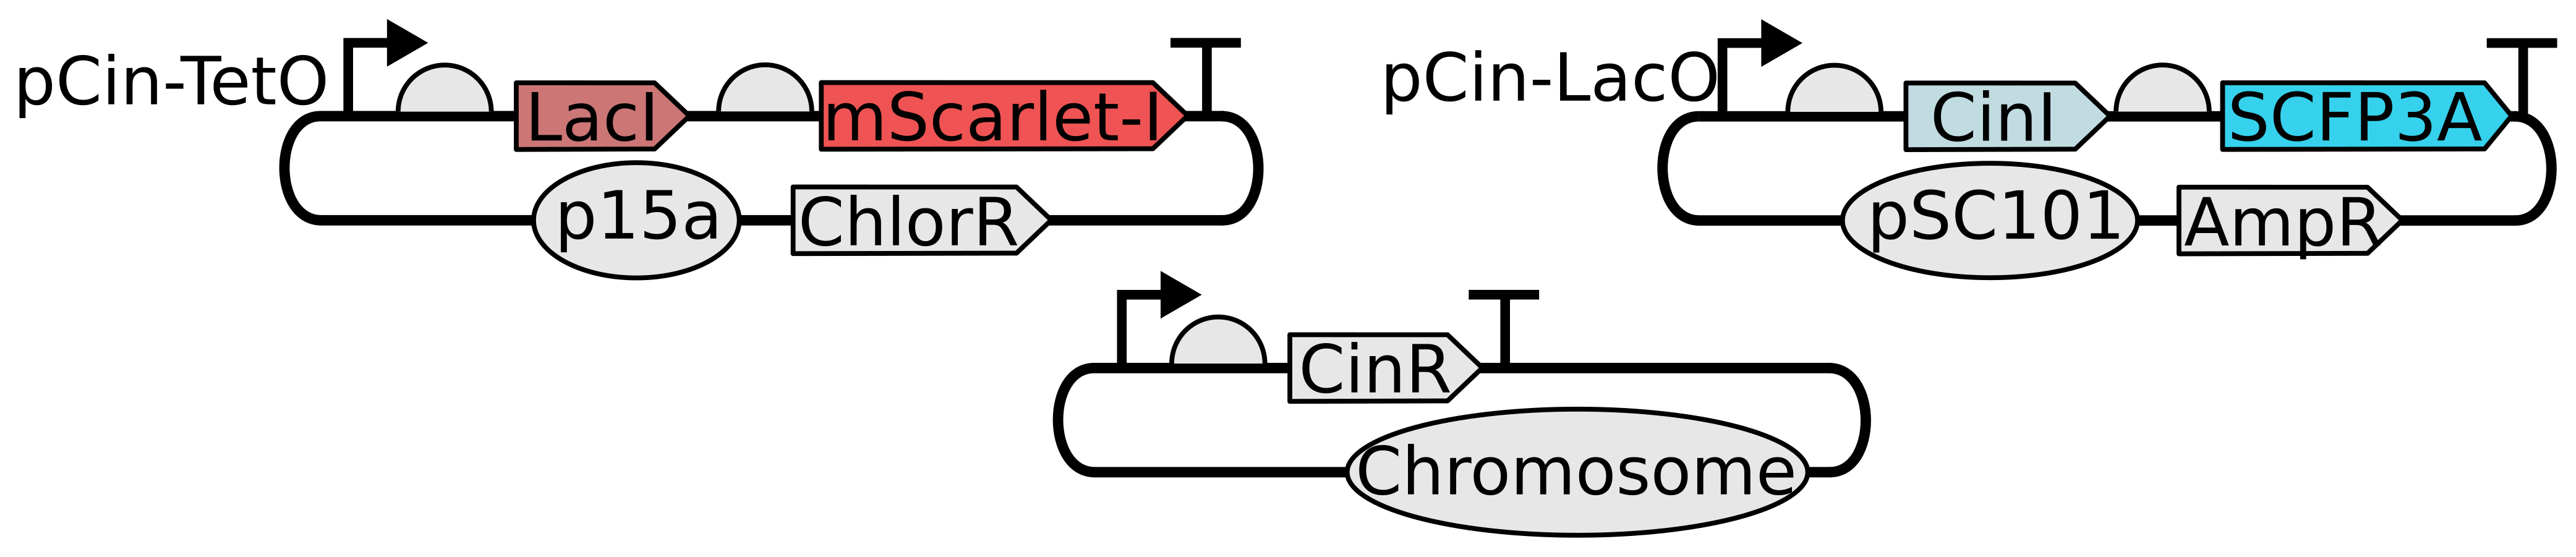 The genetic components of the pulsatile communication circuit. Quorum sensing components are drawn from the CinRI system from the species Rhizobium leguminosarum. The synthase protein, CinI, produces N-(3-hydroxy-7-cis-tetradecanoyl)-L-homoserine lactone (referred to as AHL in the context of the Cin system for convenience) (Lithgow et al. (2000)). CinR is expressed constitutively, AHL-bound CinR promotes expression from pCin, and LacI represses CinI transcription when bound to the LacO site. AHL freely diffuses through cell walls.